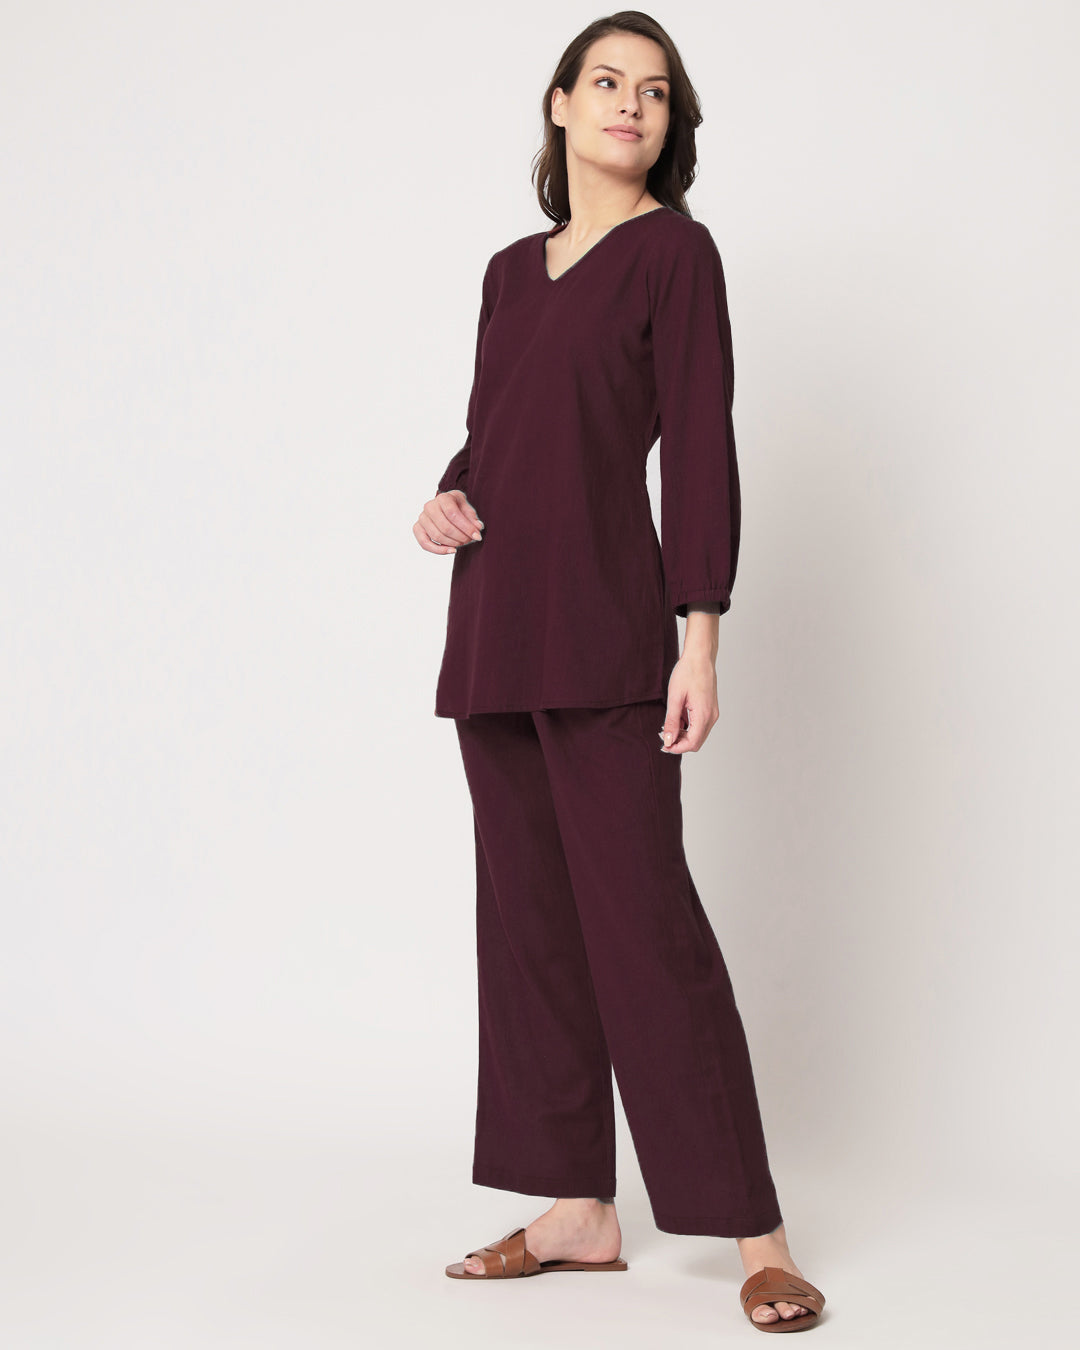 Plum Passion Bishop Sleeves Solid Top (Without Bottoms)